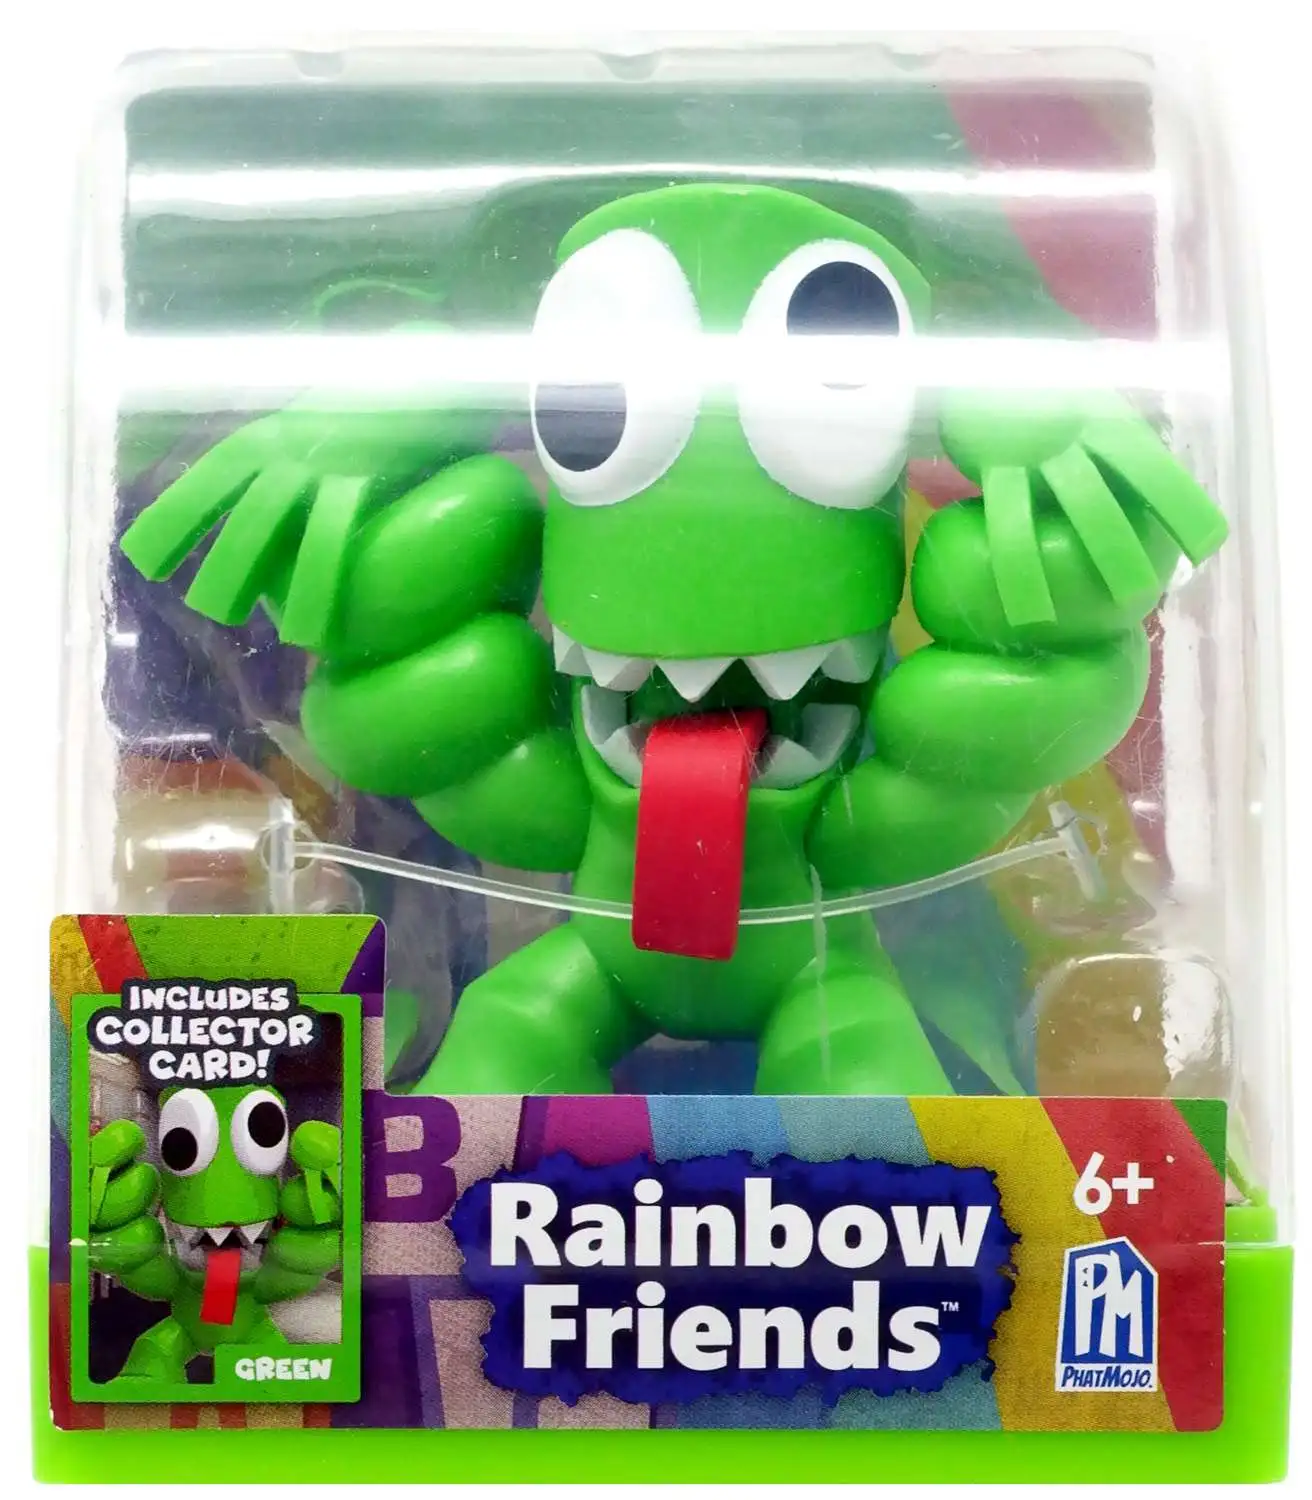 Rainbow Friends & PhatMojo Team Up for Toys and More - aNb Media, Inc.